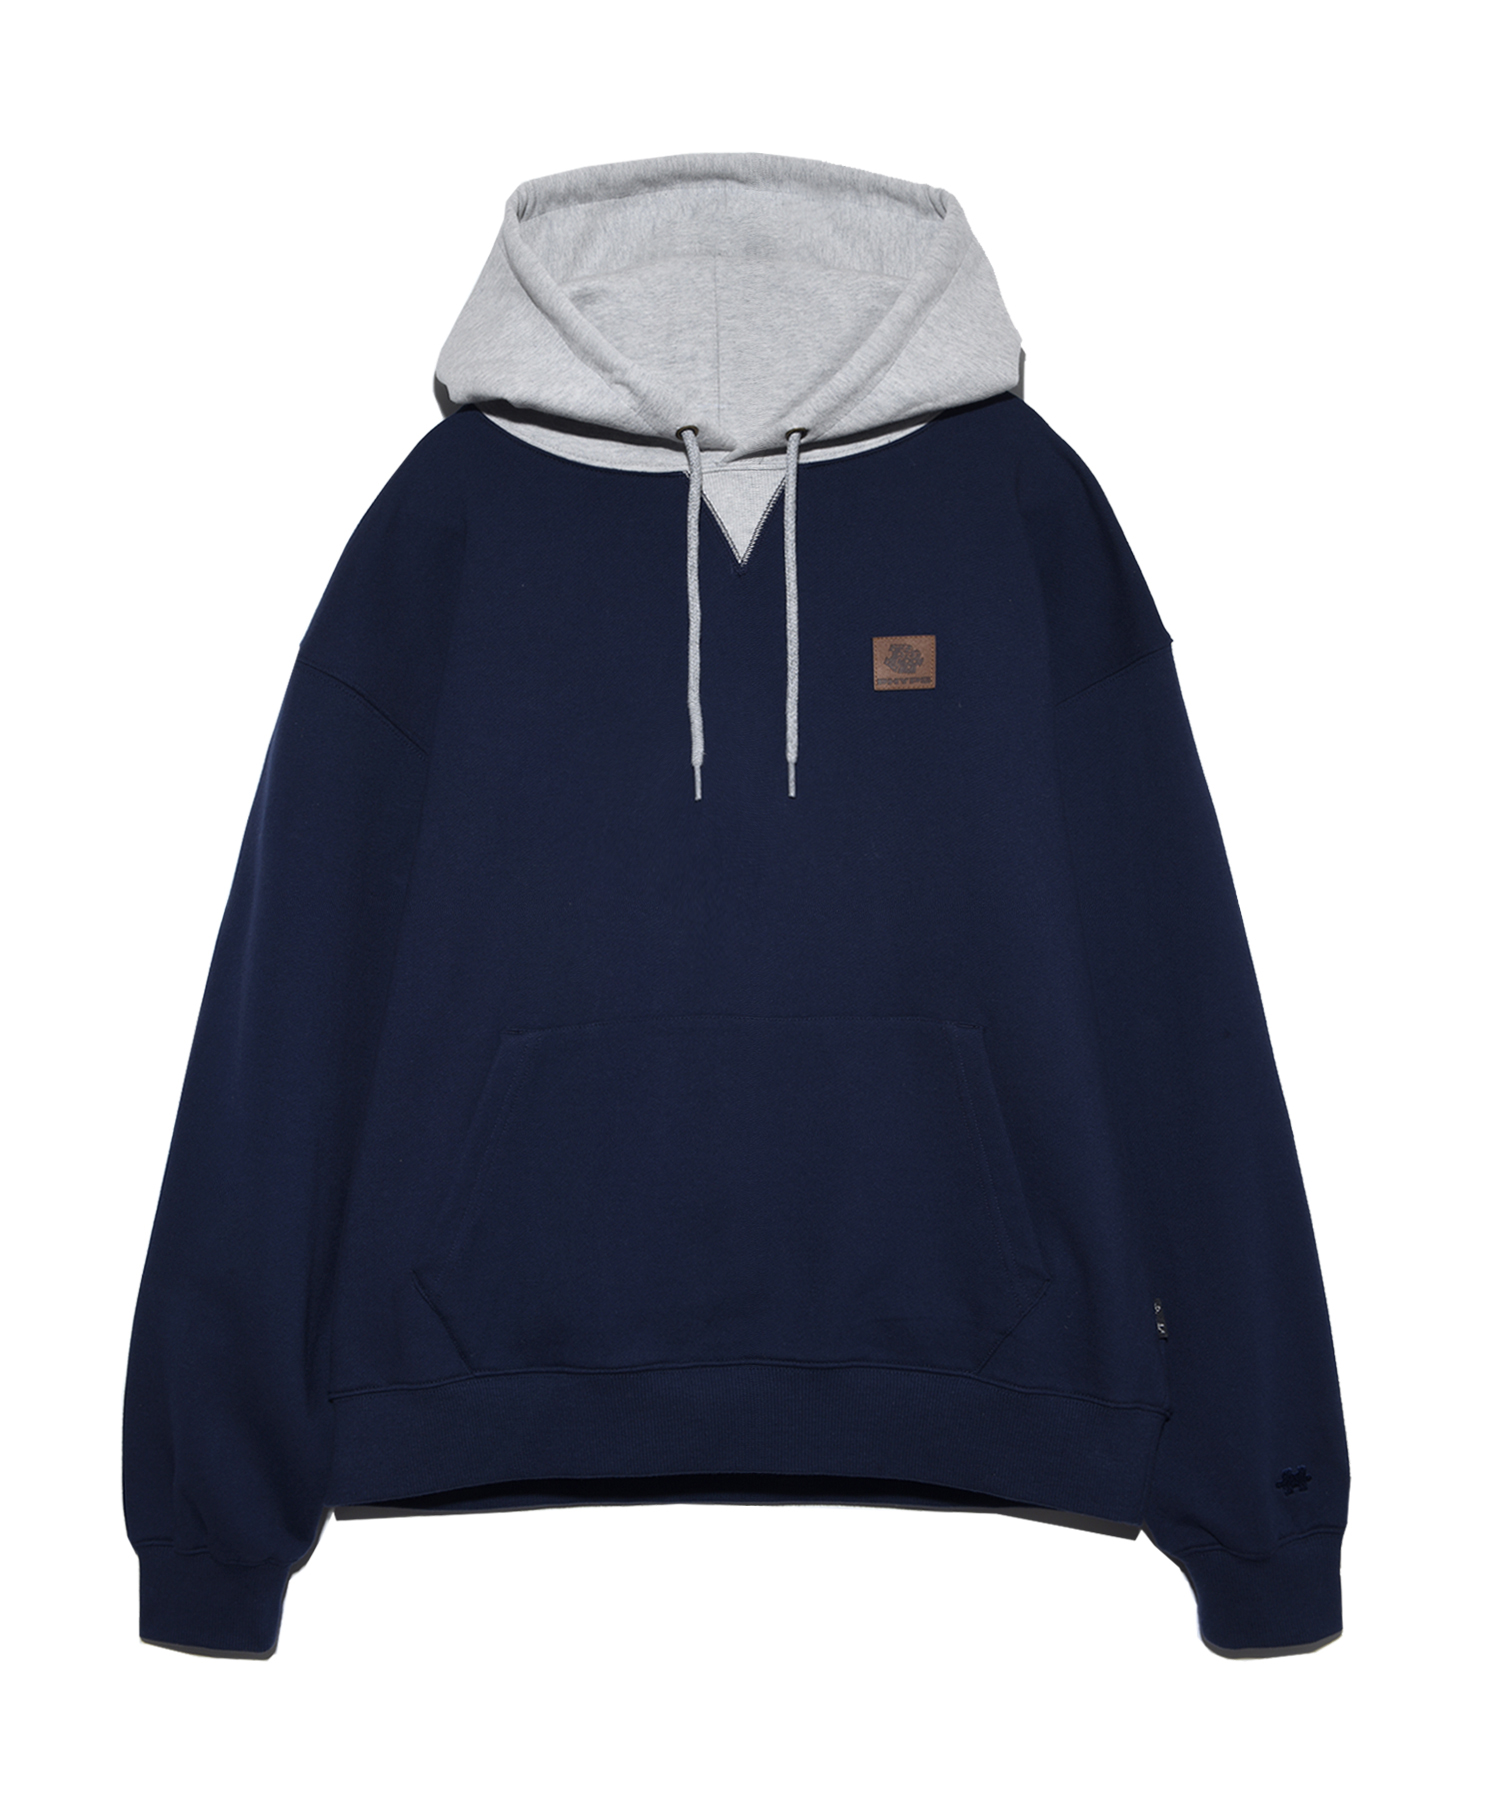 LEATHER LABEL HOODIE NAVY